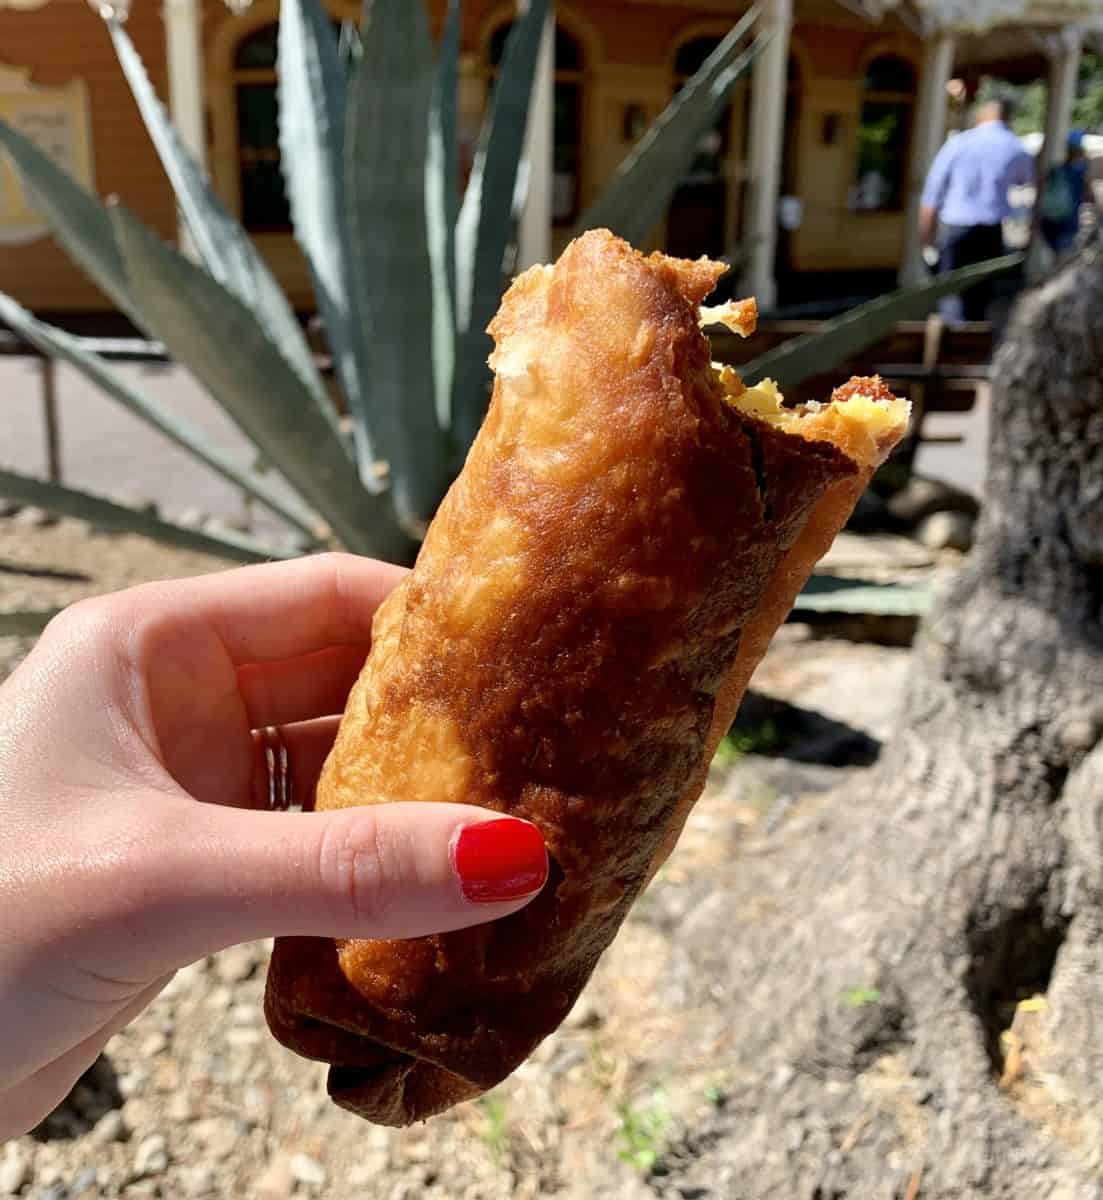 REVIEW: New Breakfast Chimichanga is a Quick, Greasy Breakfast Option